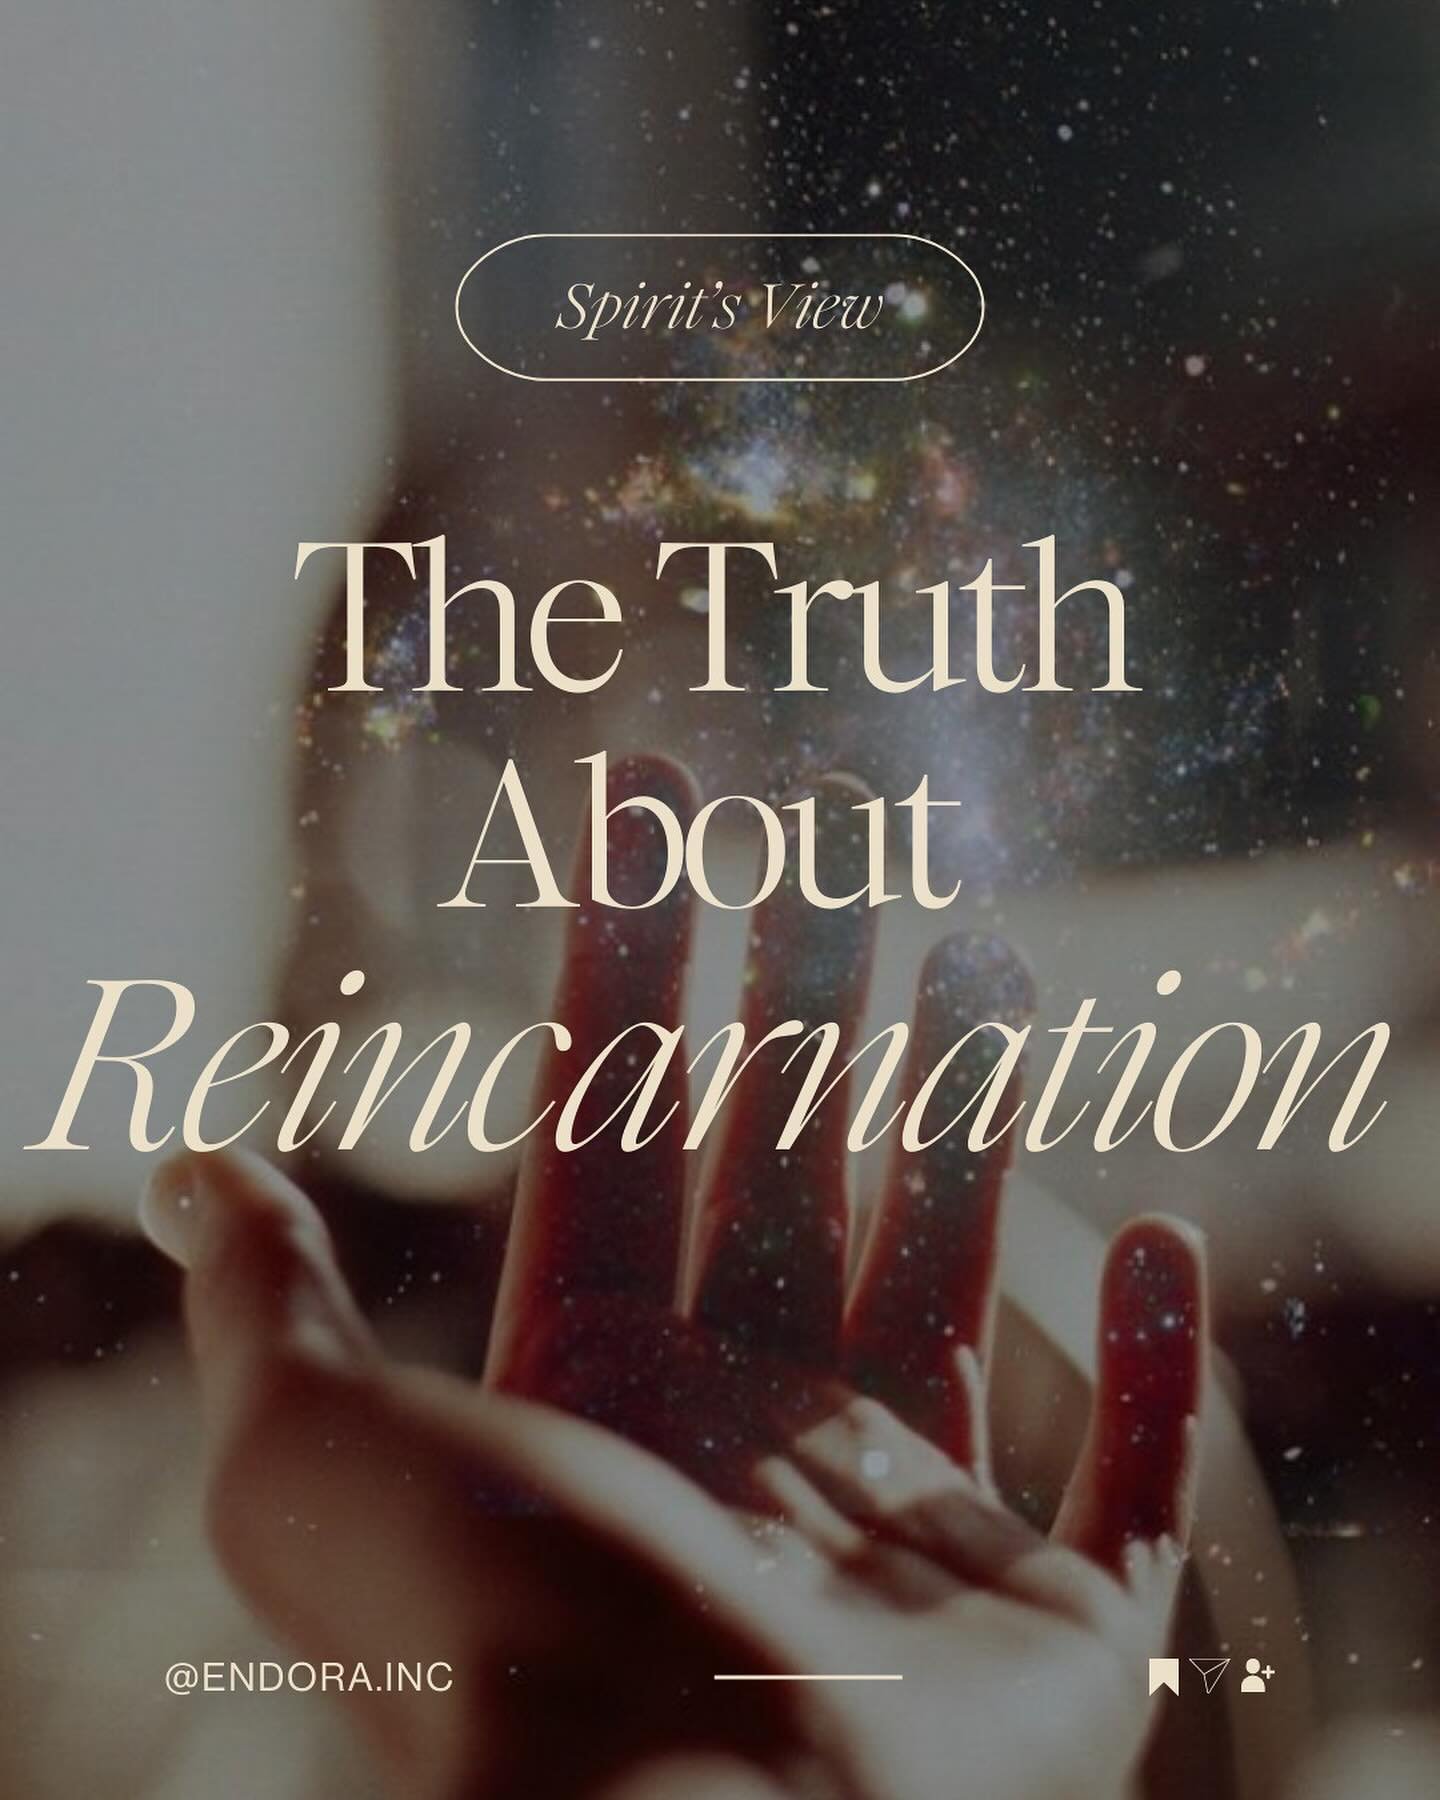 Reincarnation isn&rsquo;t a theory, it&rsquo;s a fact&hellip; 

One I didn&rsquo;t realize some people didn&rsquo;t know until I had a conversation with someone about it! 

Apparently, mainstream society claims this as a debatable concept, but those 